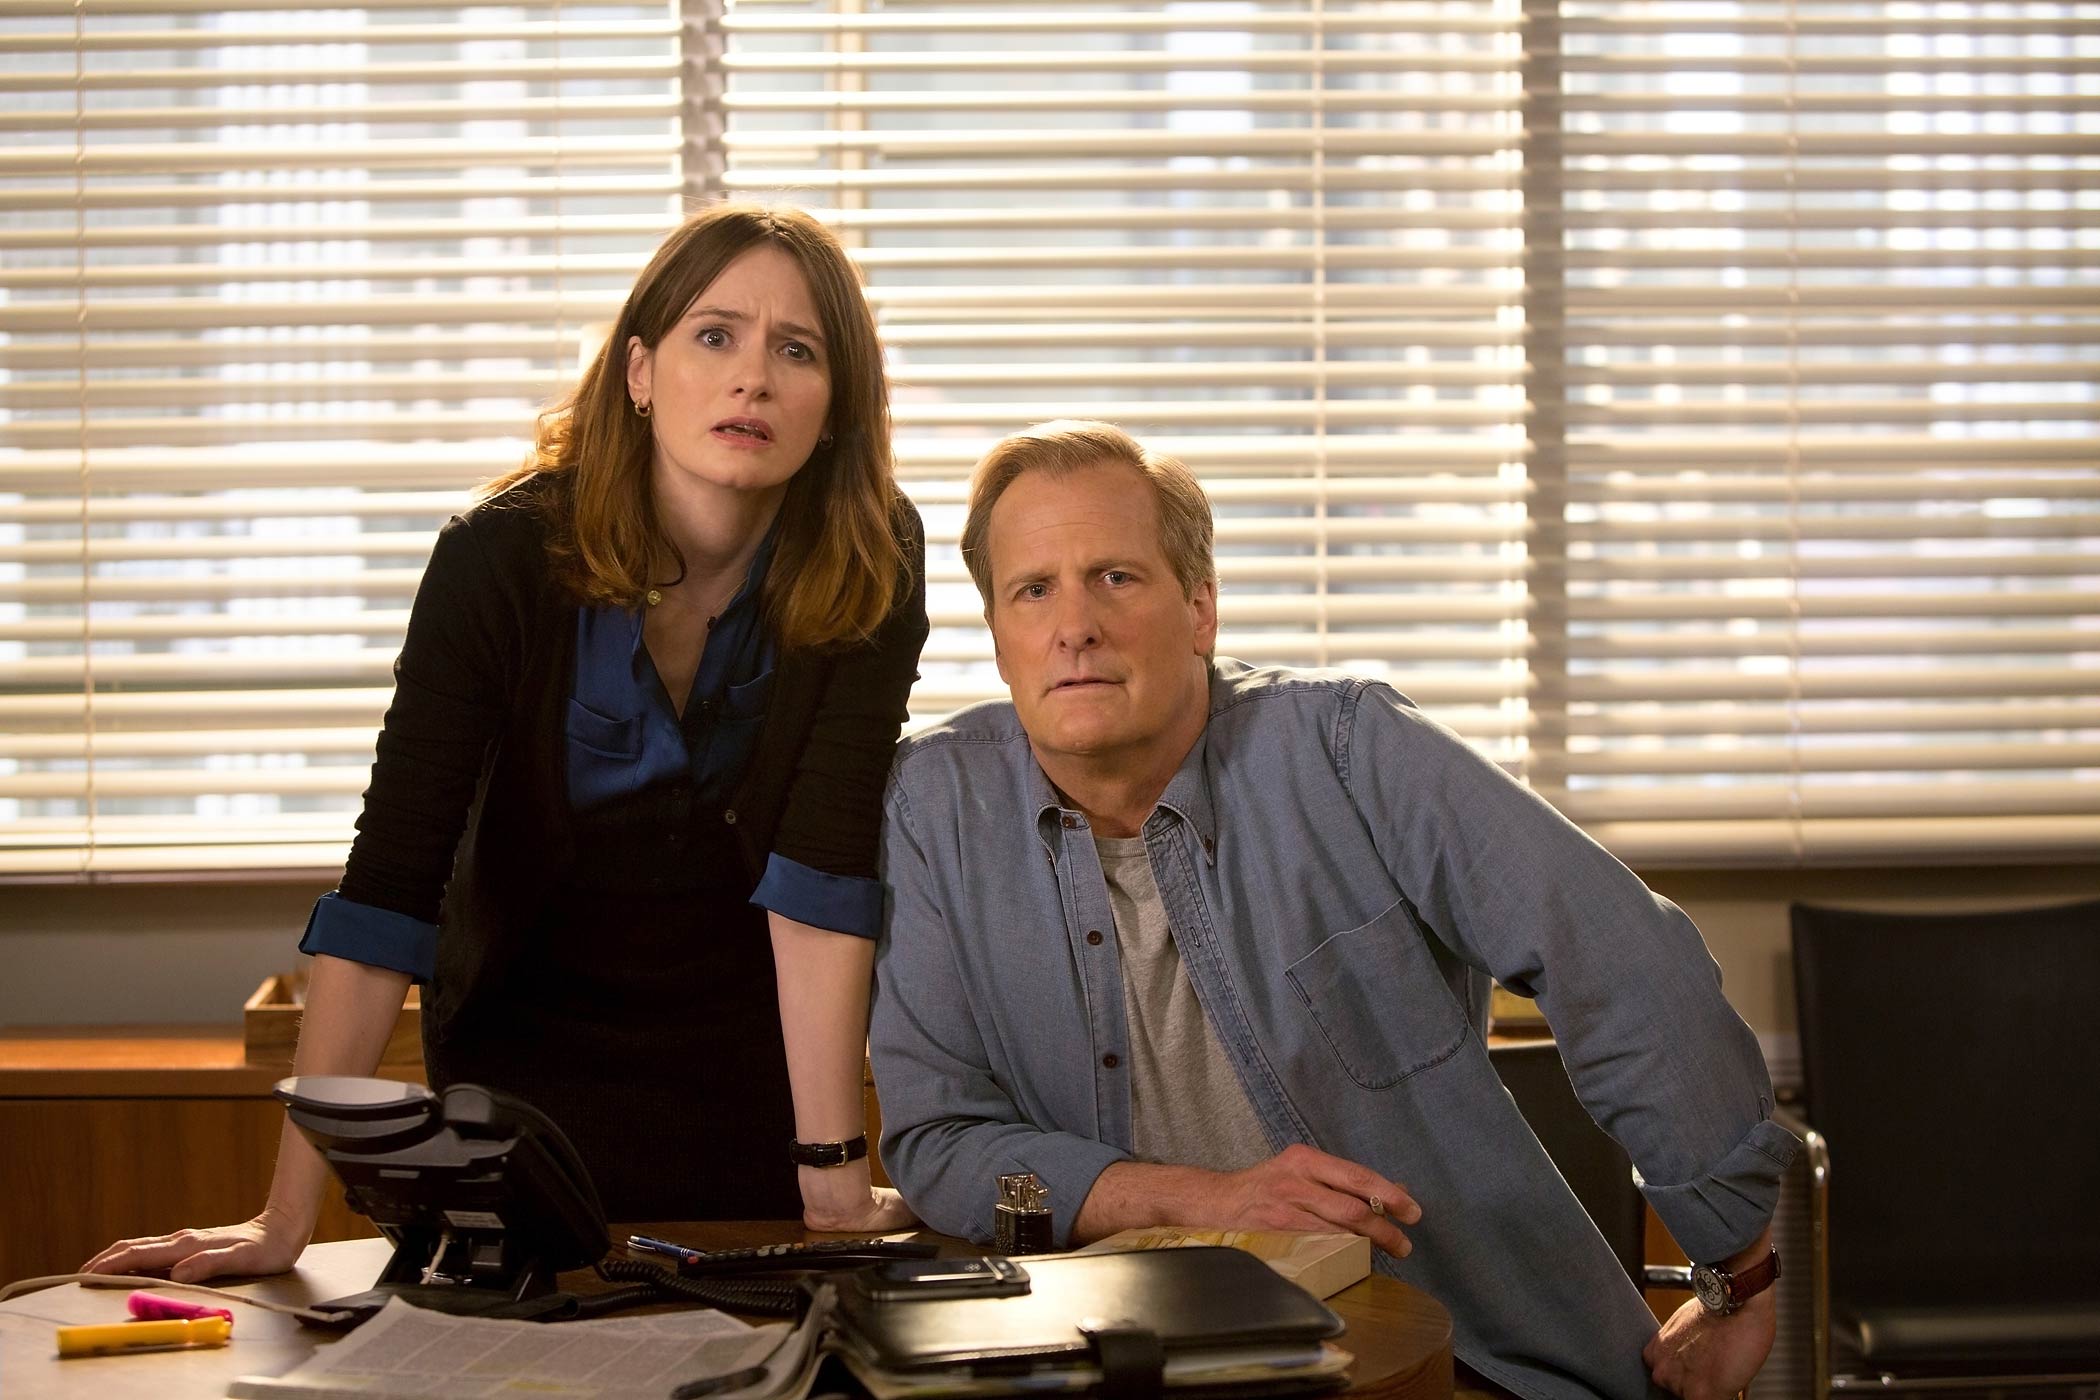 From left: Emily Mortimer as MacKenzie McHale and Jeff Daniels as Will McAvoy in <i>The Newsroom</i> (HBO)